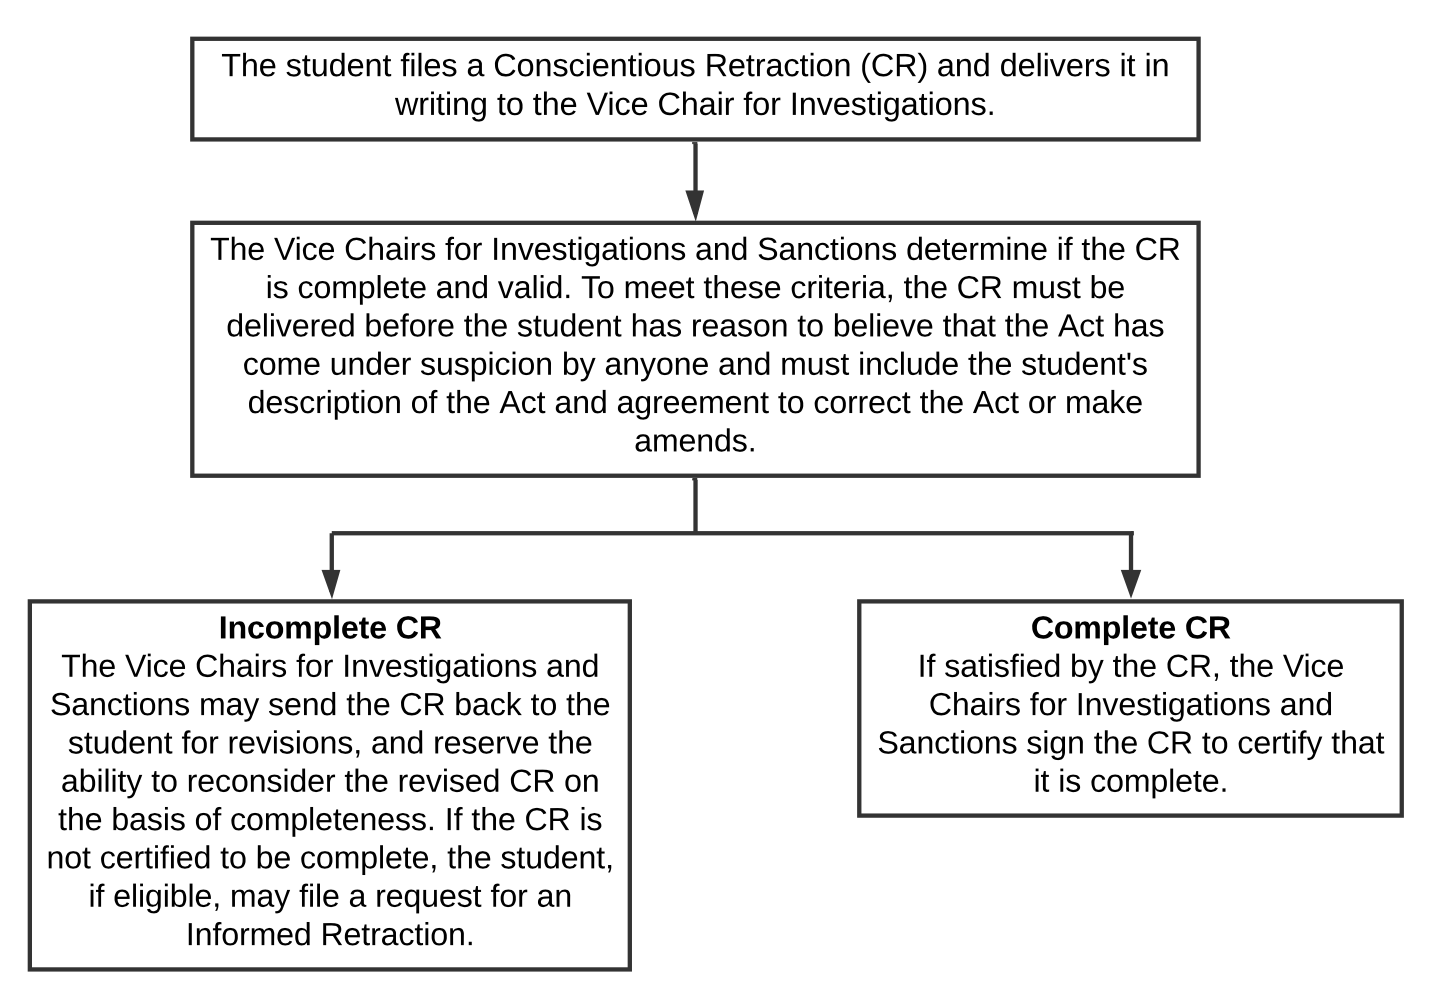 Displayed is a flowchart of the CR process and information regarding its components: validity and completeness.